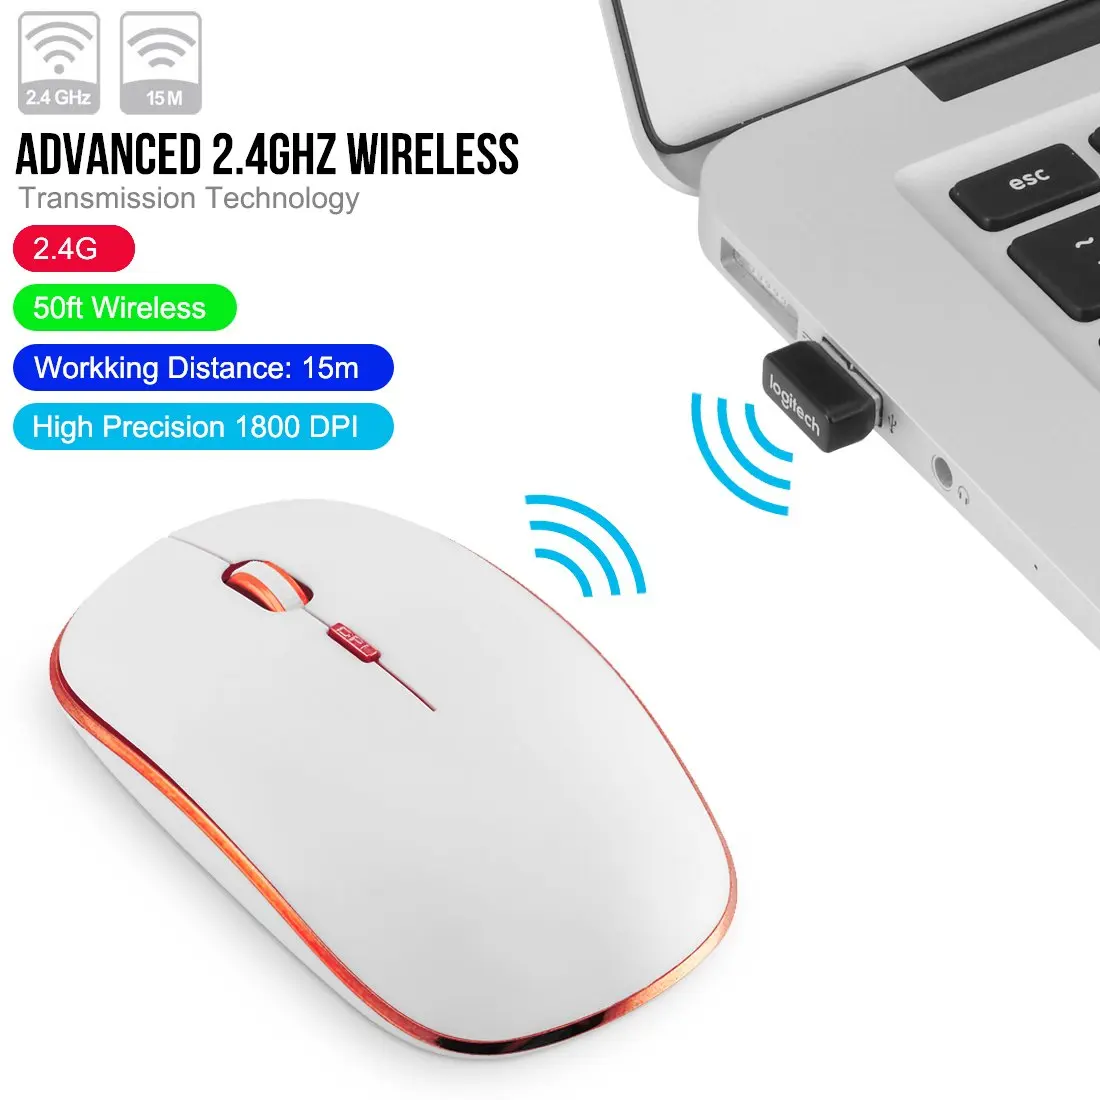 

New 2.4G Wireless Mouse Slim Silent Computer Mouse with Receiver 1800DPI Adjustable Optical Mouse Silent Click for PC Laptop